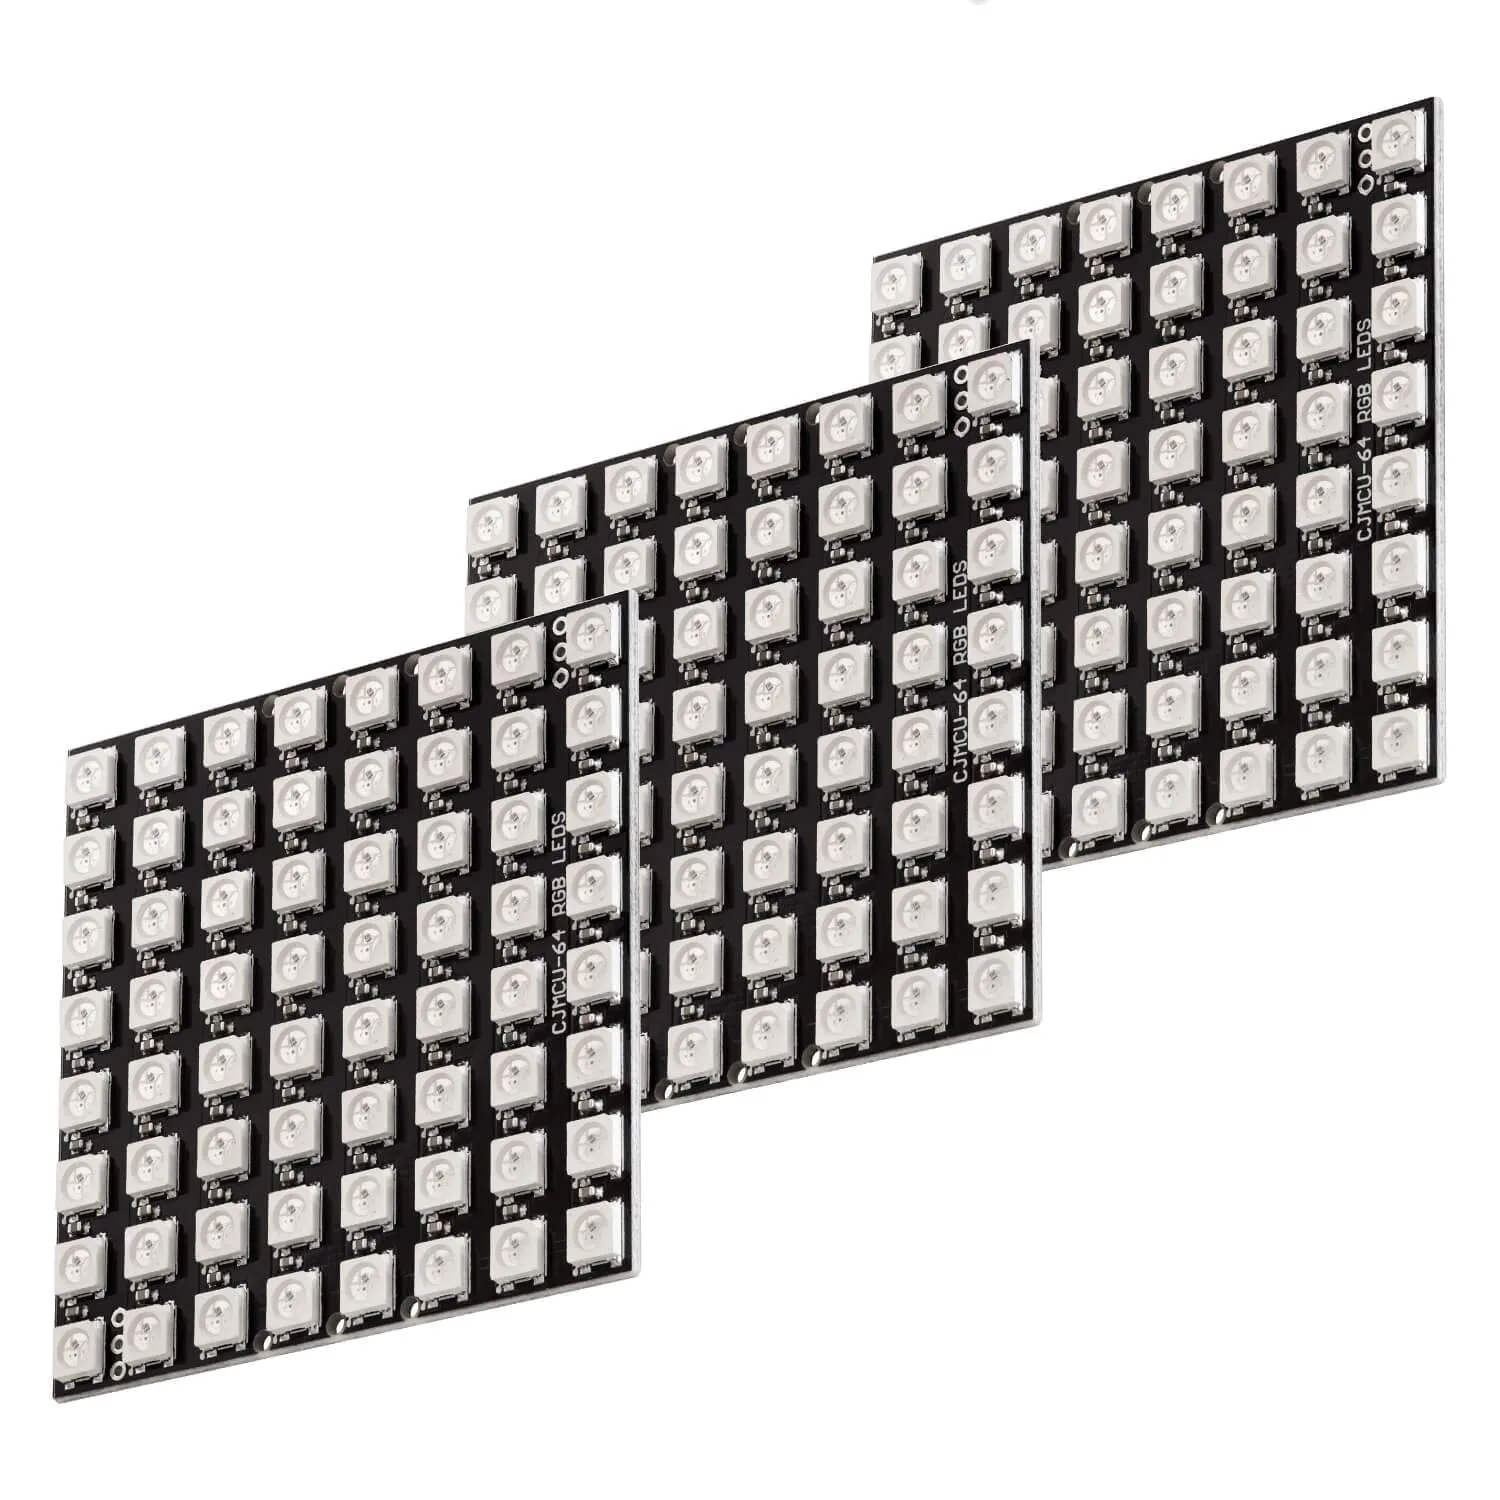 

3 x U 64 LED Matrix Panel CJMCU-8X8 Module Compatible with for Arduino and for Raspberry Pi